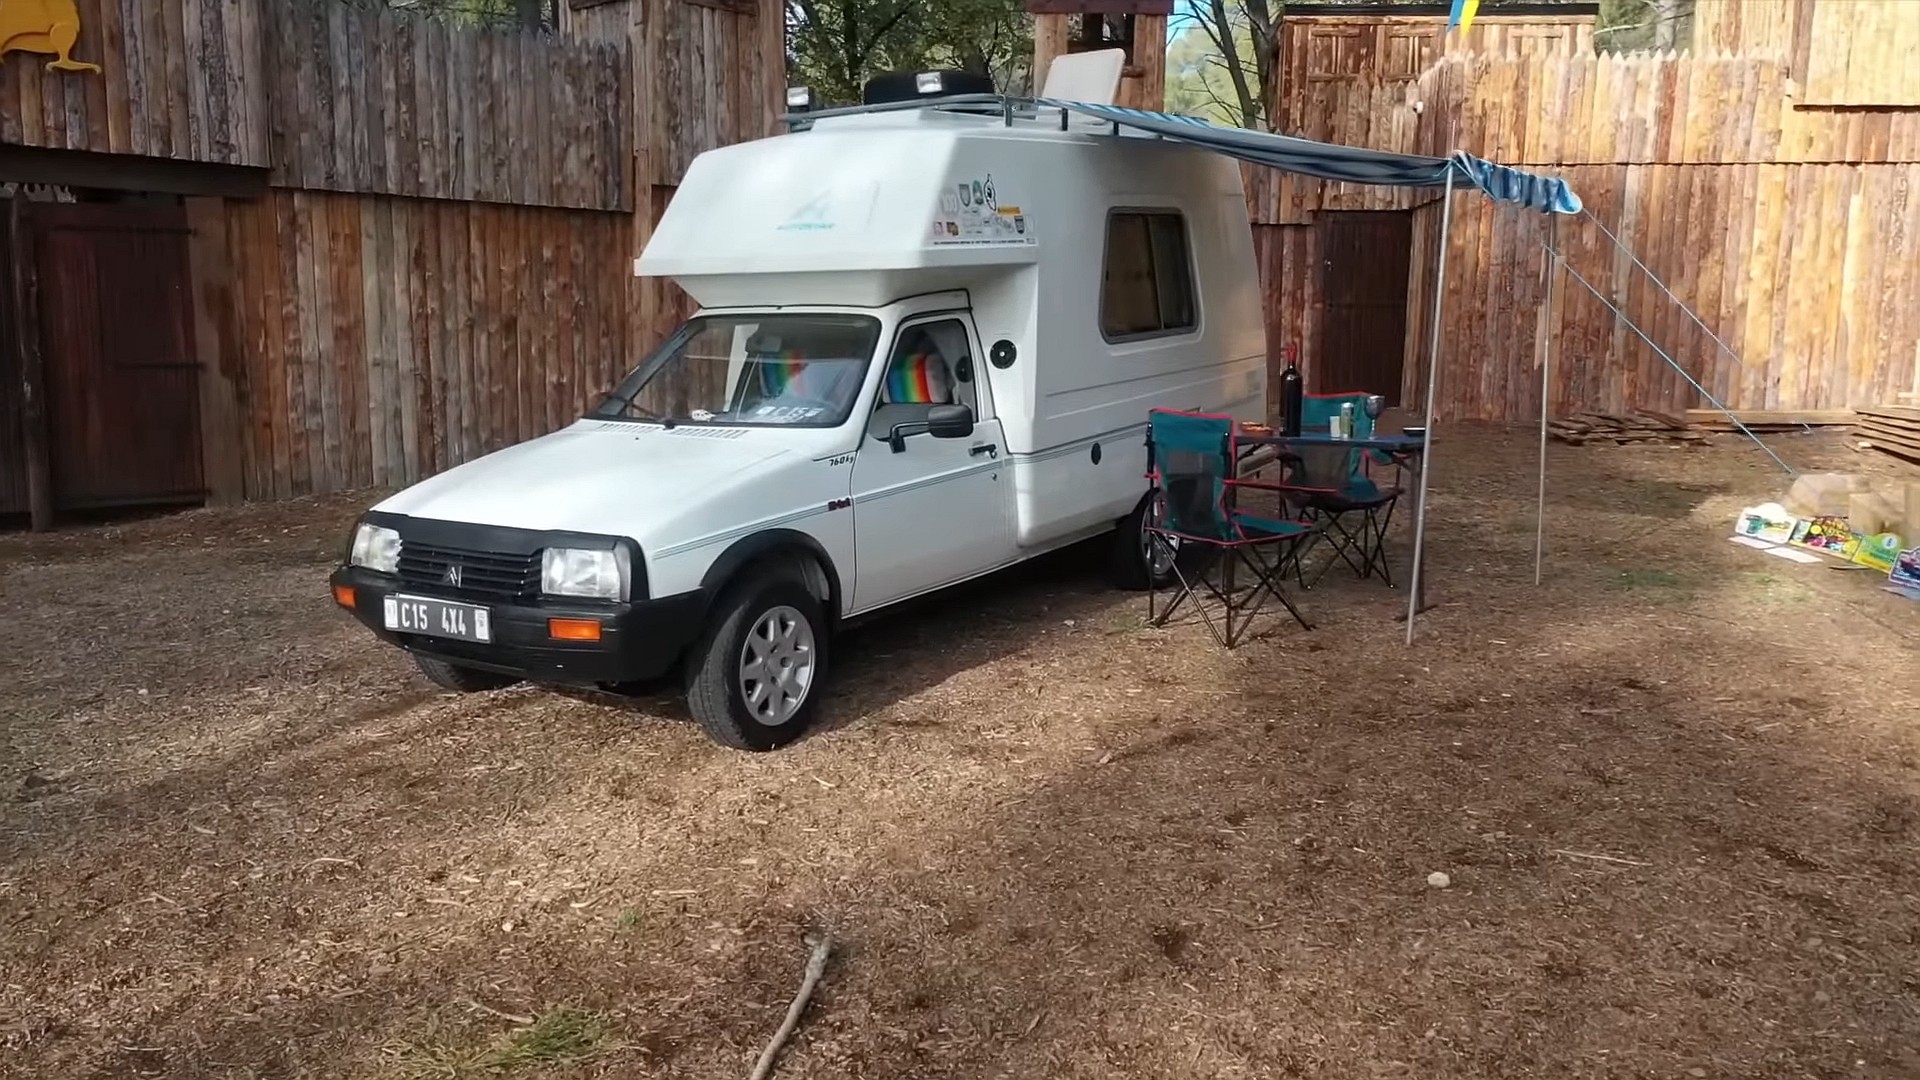 1990 Citroen C15 Autostar Is a Tiny Home on Wheels and the Last of Its Kind  - autoevolution